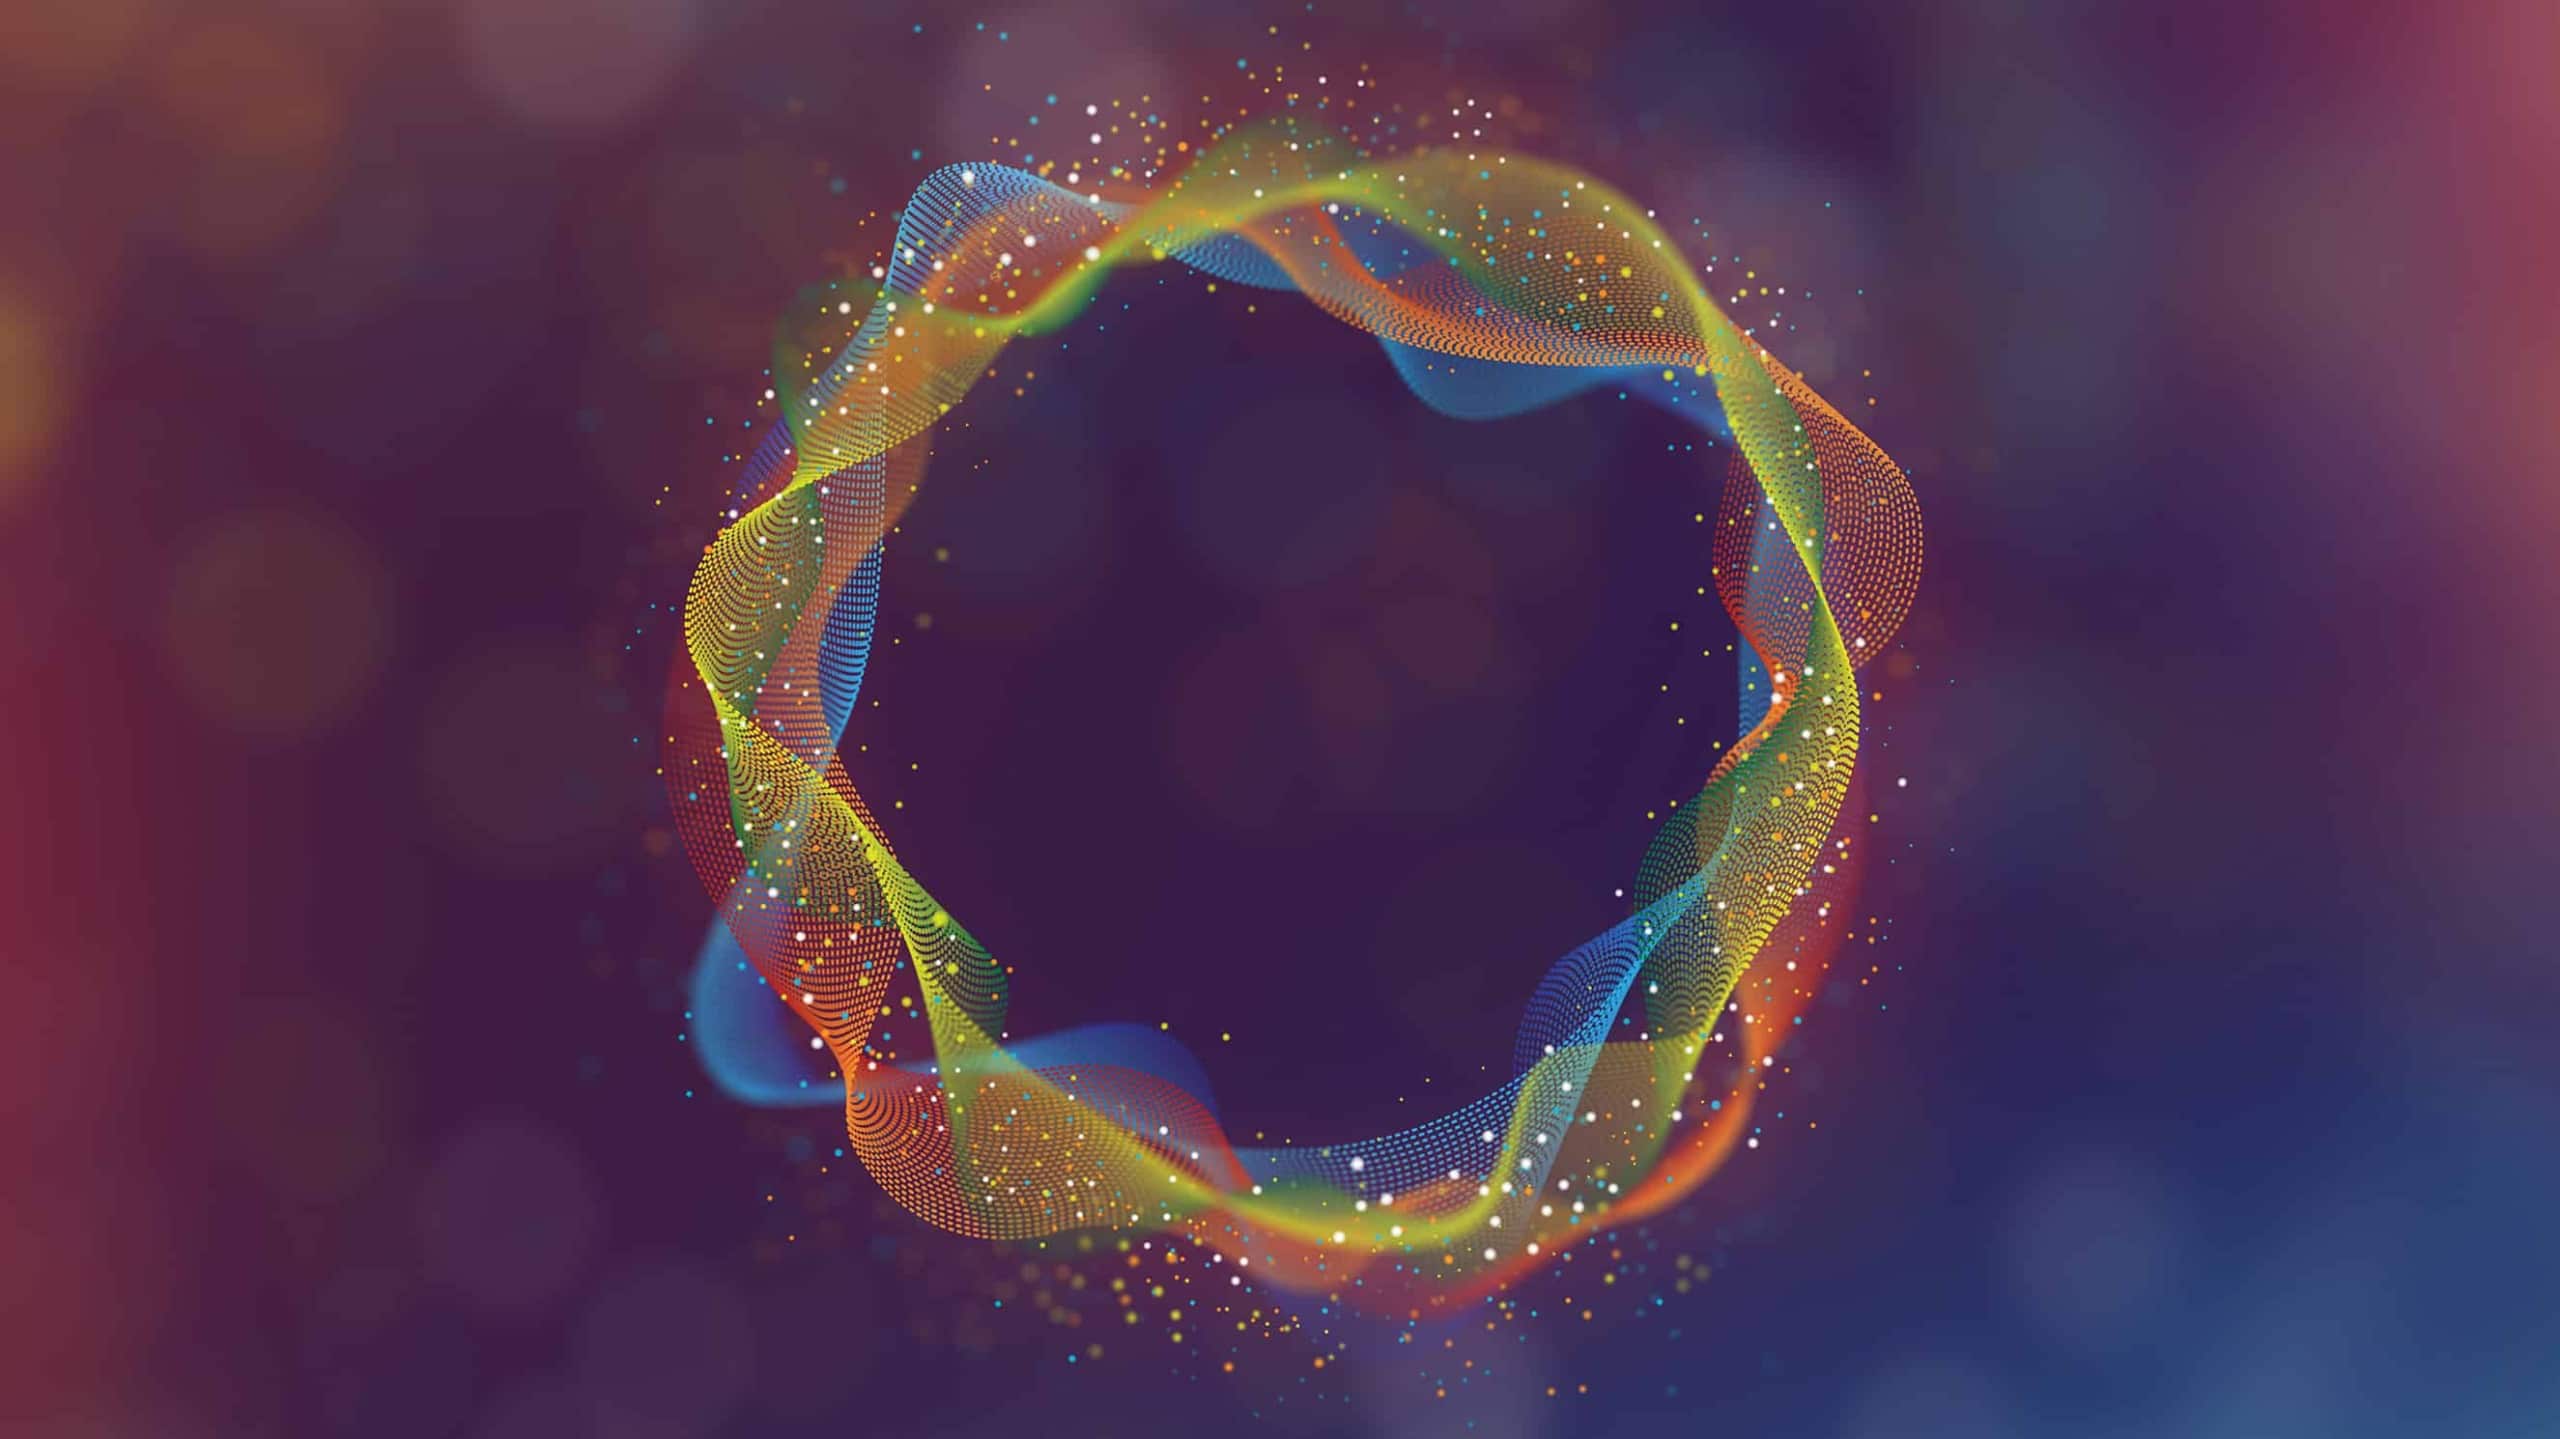 A glowing, circular abstract shape composed of vibrant, colorful dots connected by lines, forming a dynamic, swirling pattern against a blurred blue and red background.